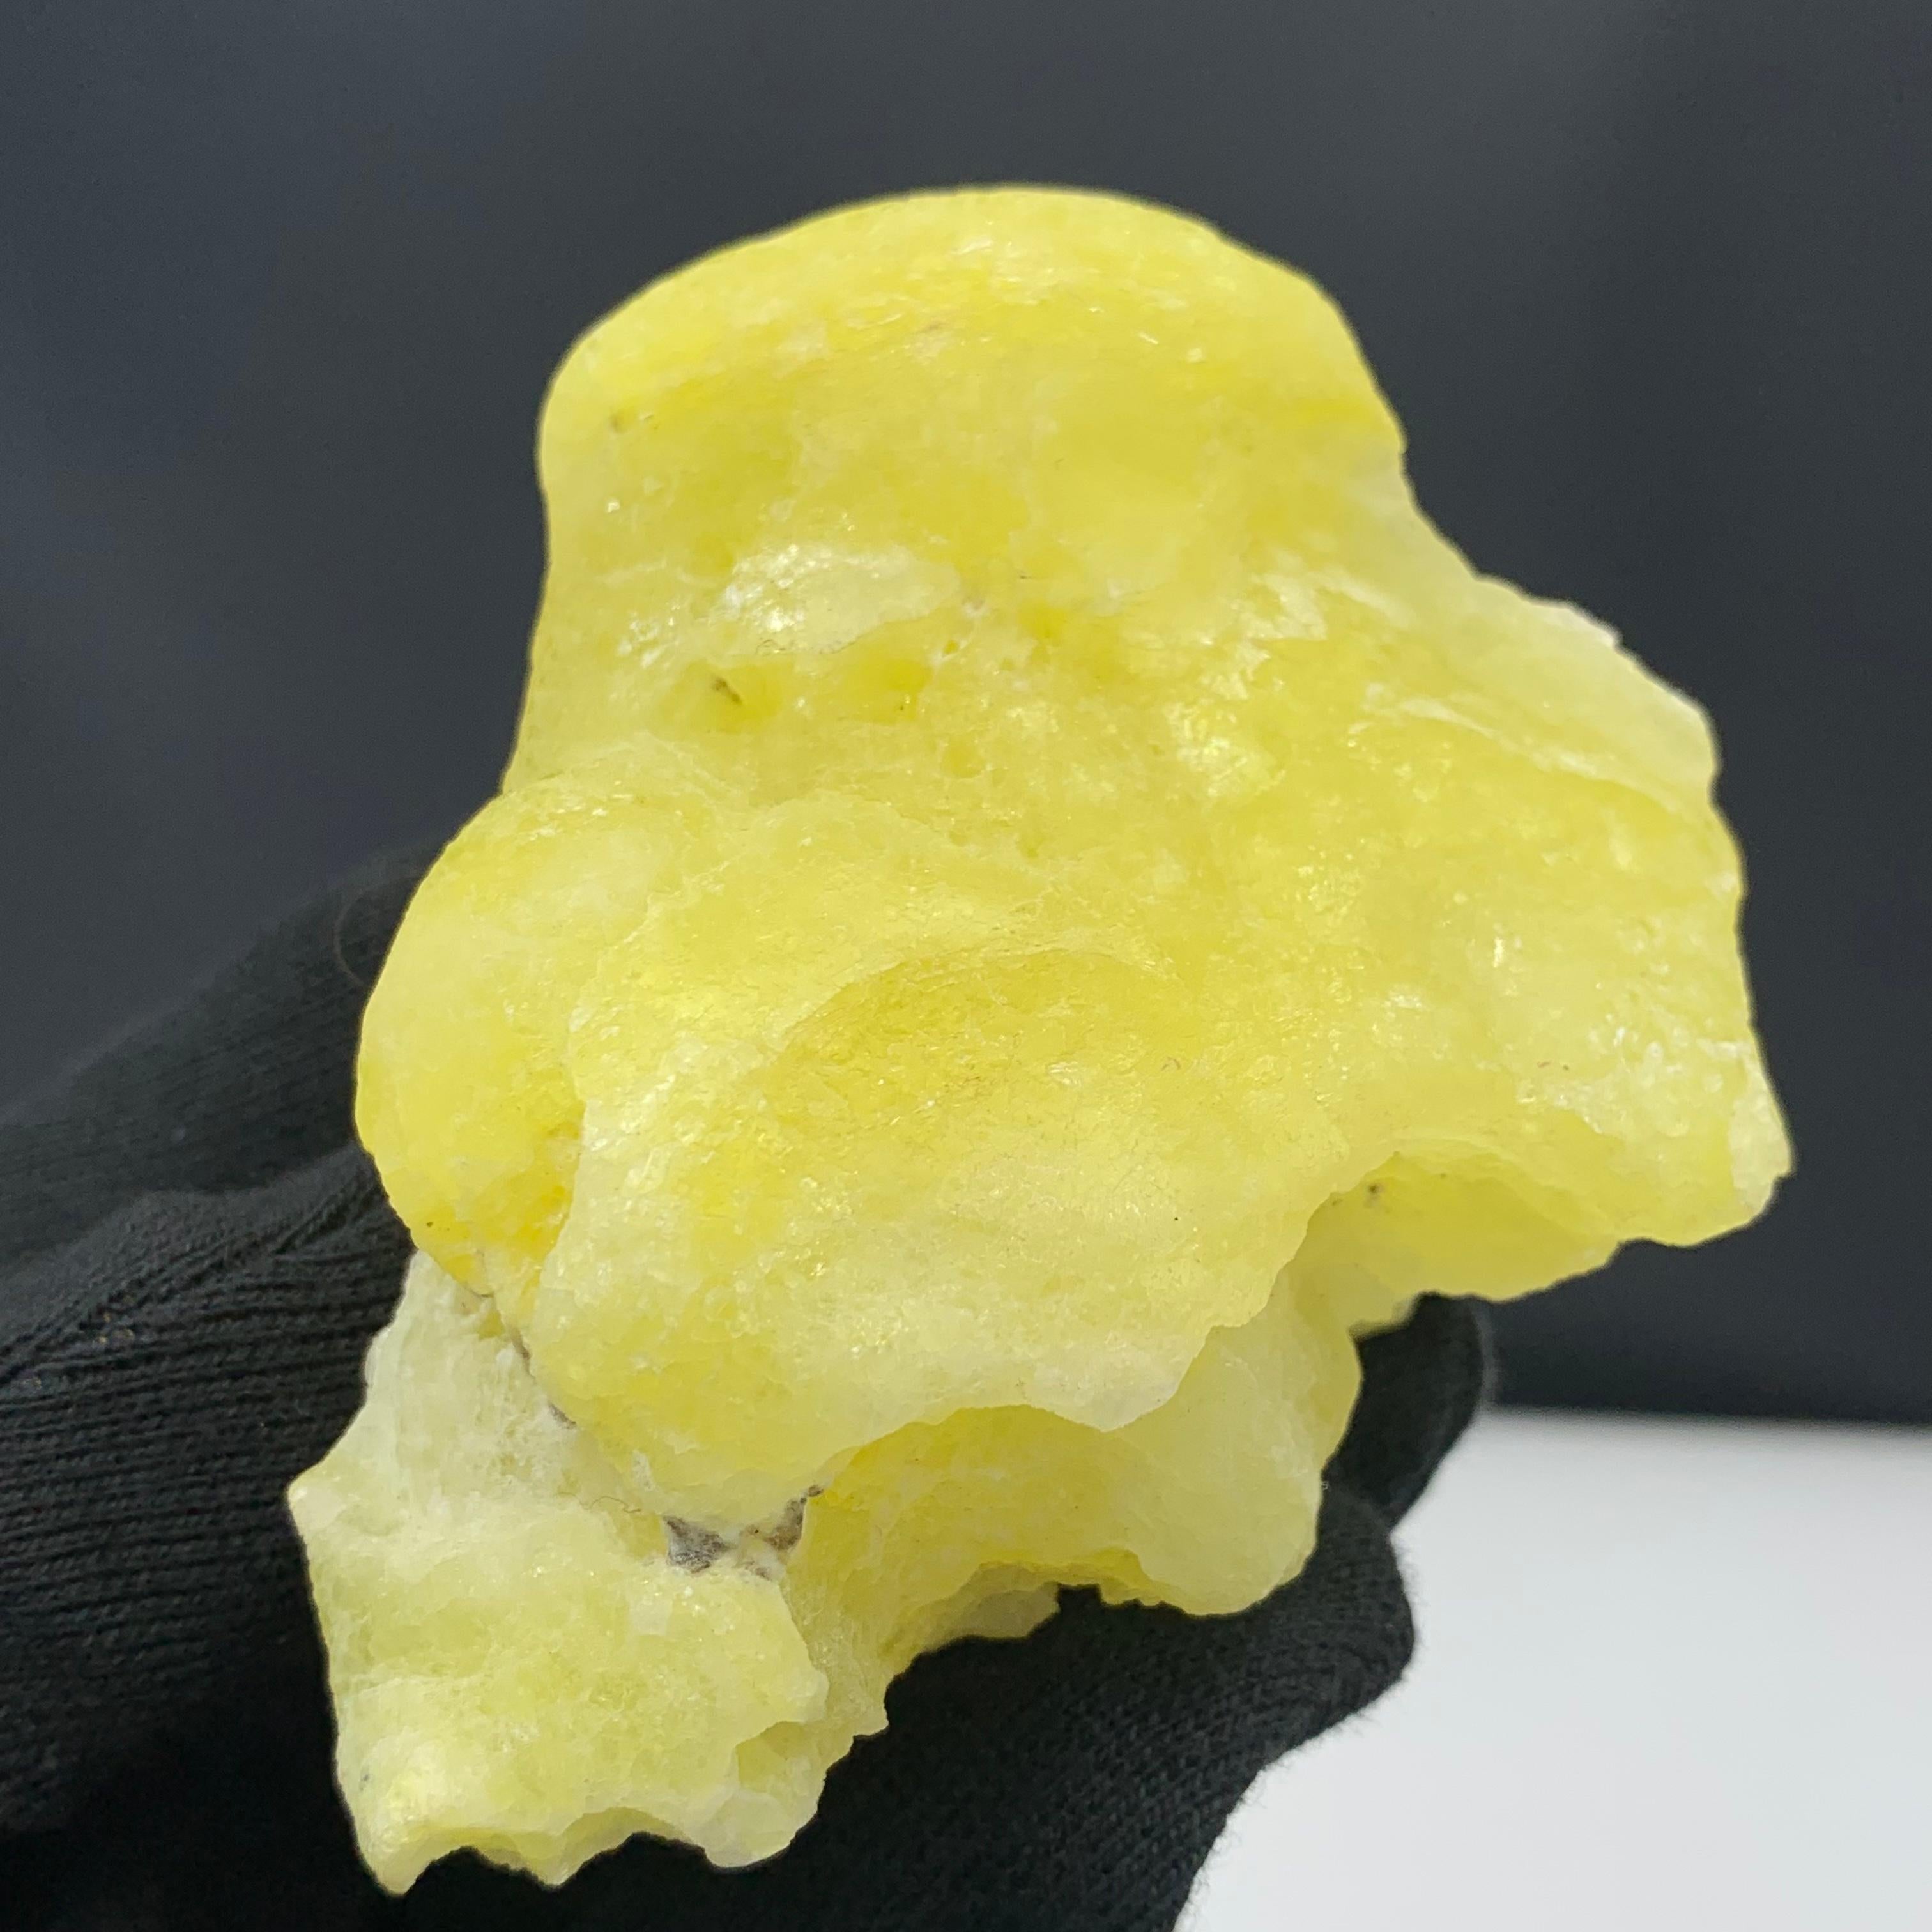 Other 173 Gram Adorable Lemon Yellow Brucite In Botryoidal Rounded Habit From Pakistan For Sale